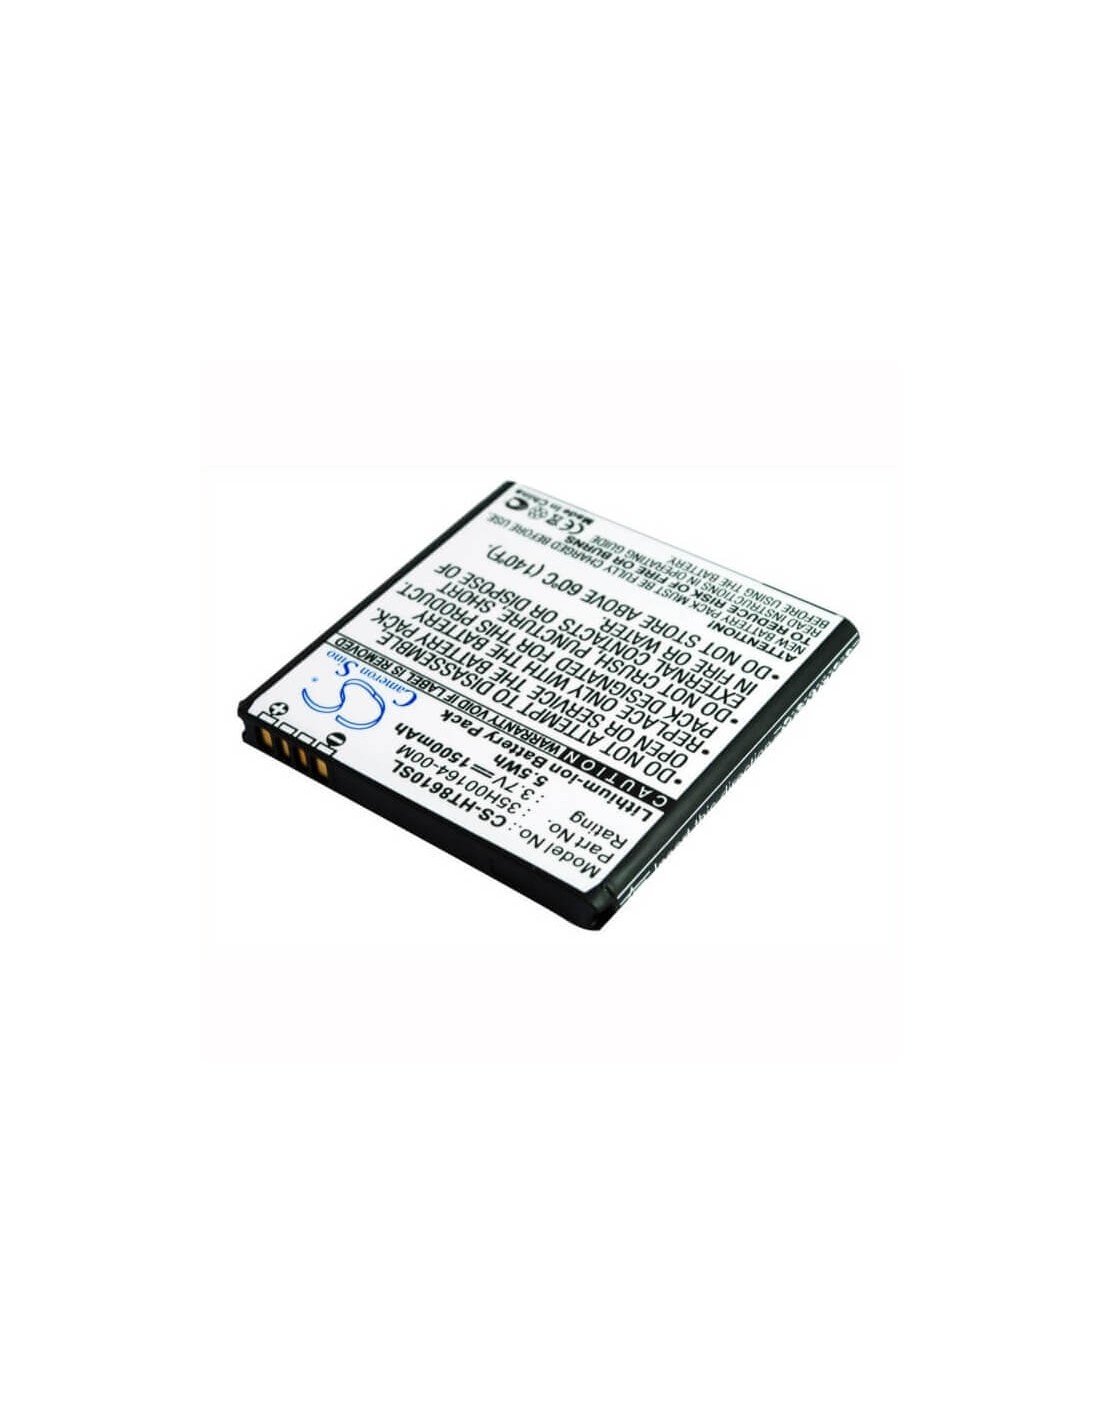 Battery for HTC EVO 3D, Pyramid, Shooter 3.7V, 1500mAh - 5.55Wh